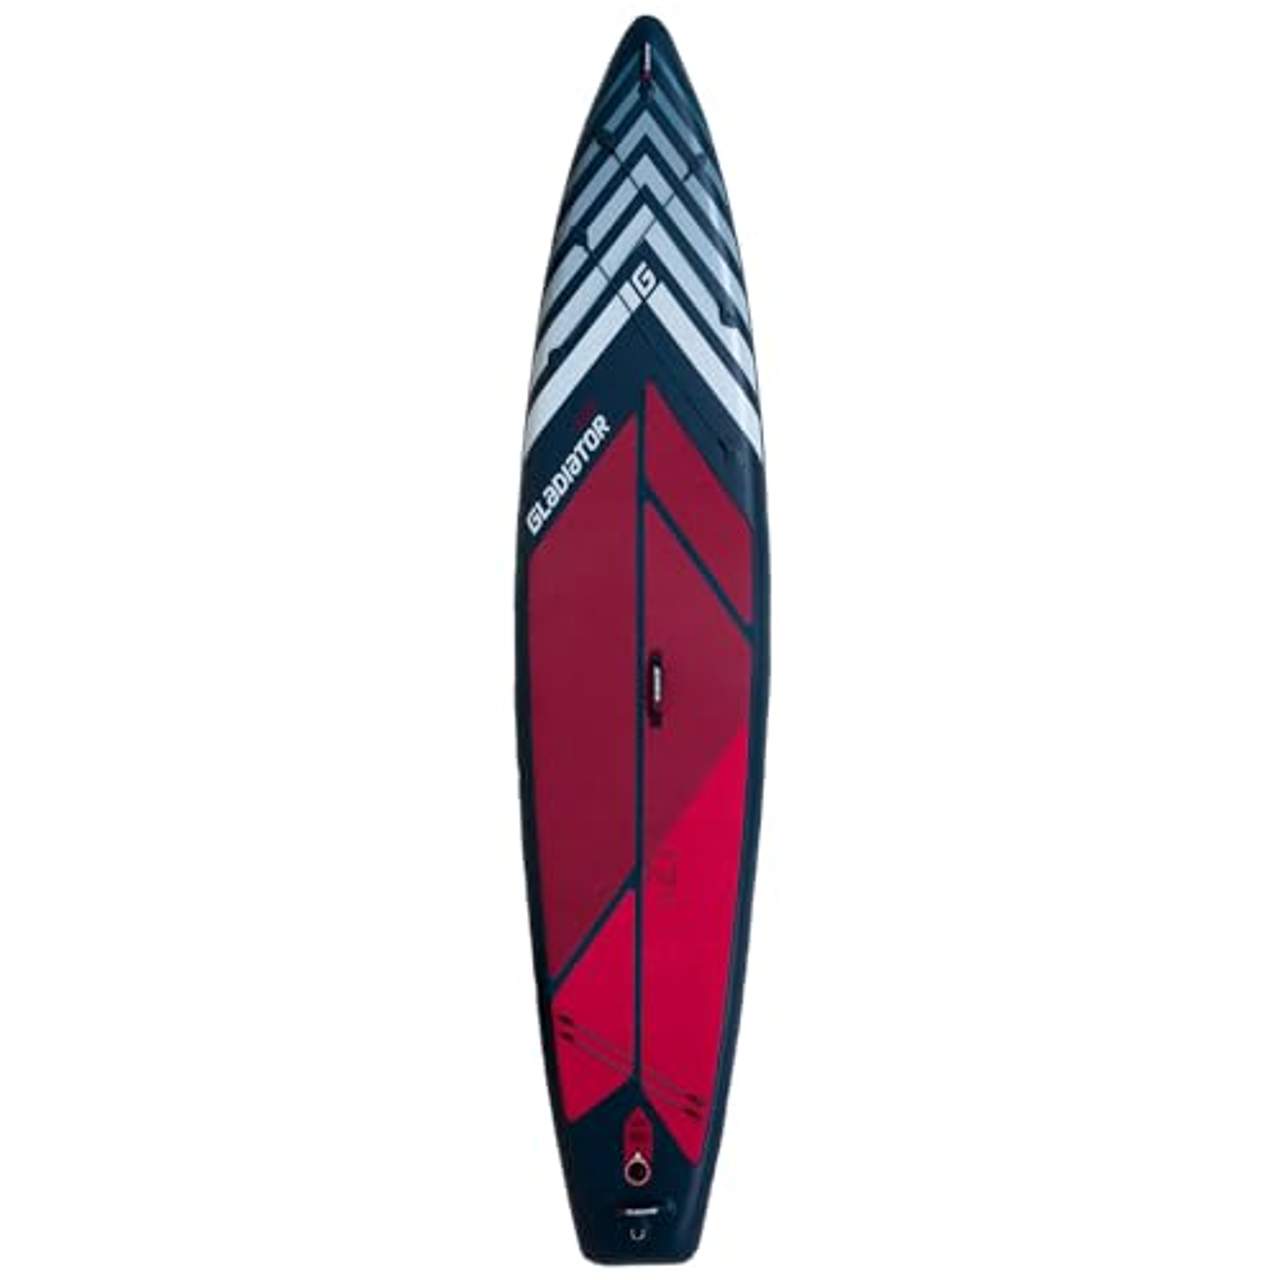 Campsup SUP Gladiator Pro 12'6 Touring Aufblasbares Stand Up Paddle Board